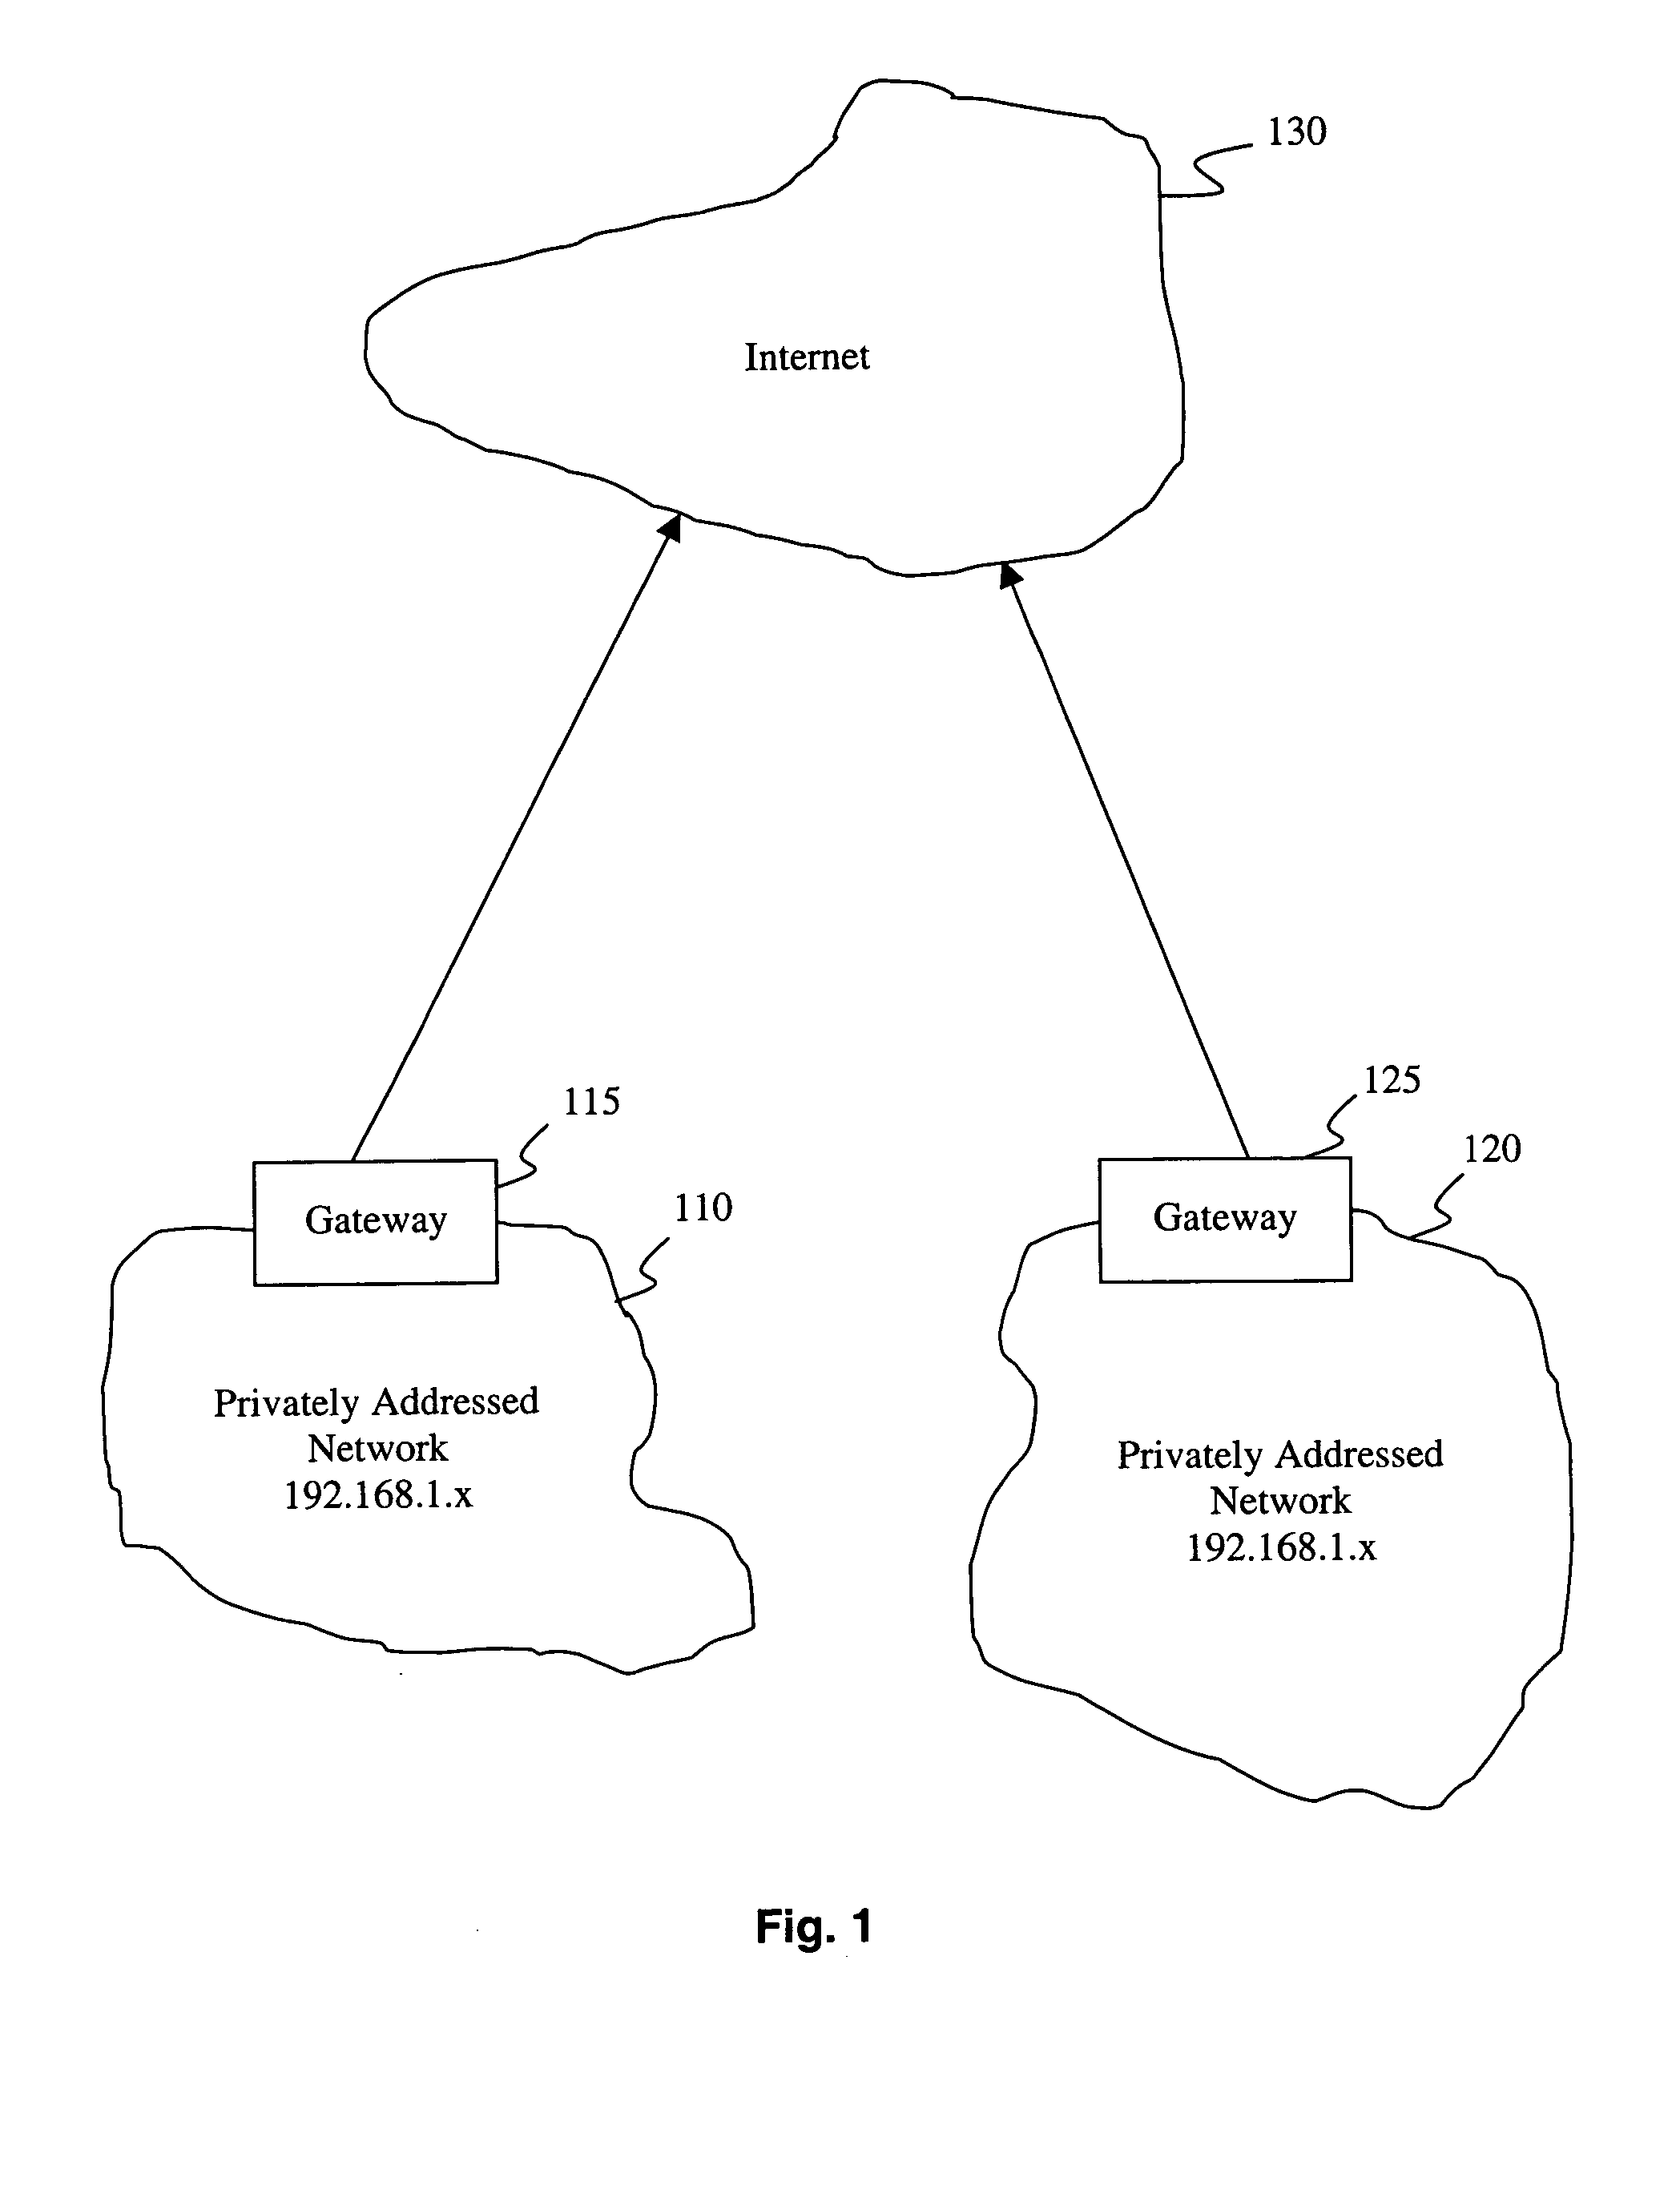 Method and apparatus for connecting privately addressed networks